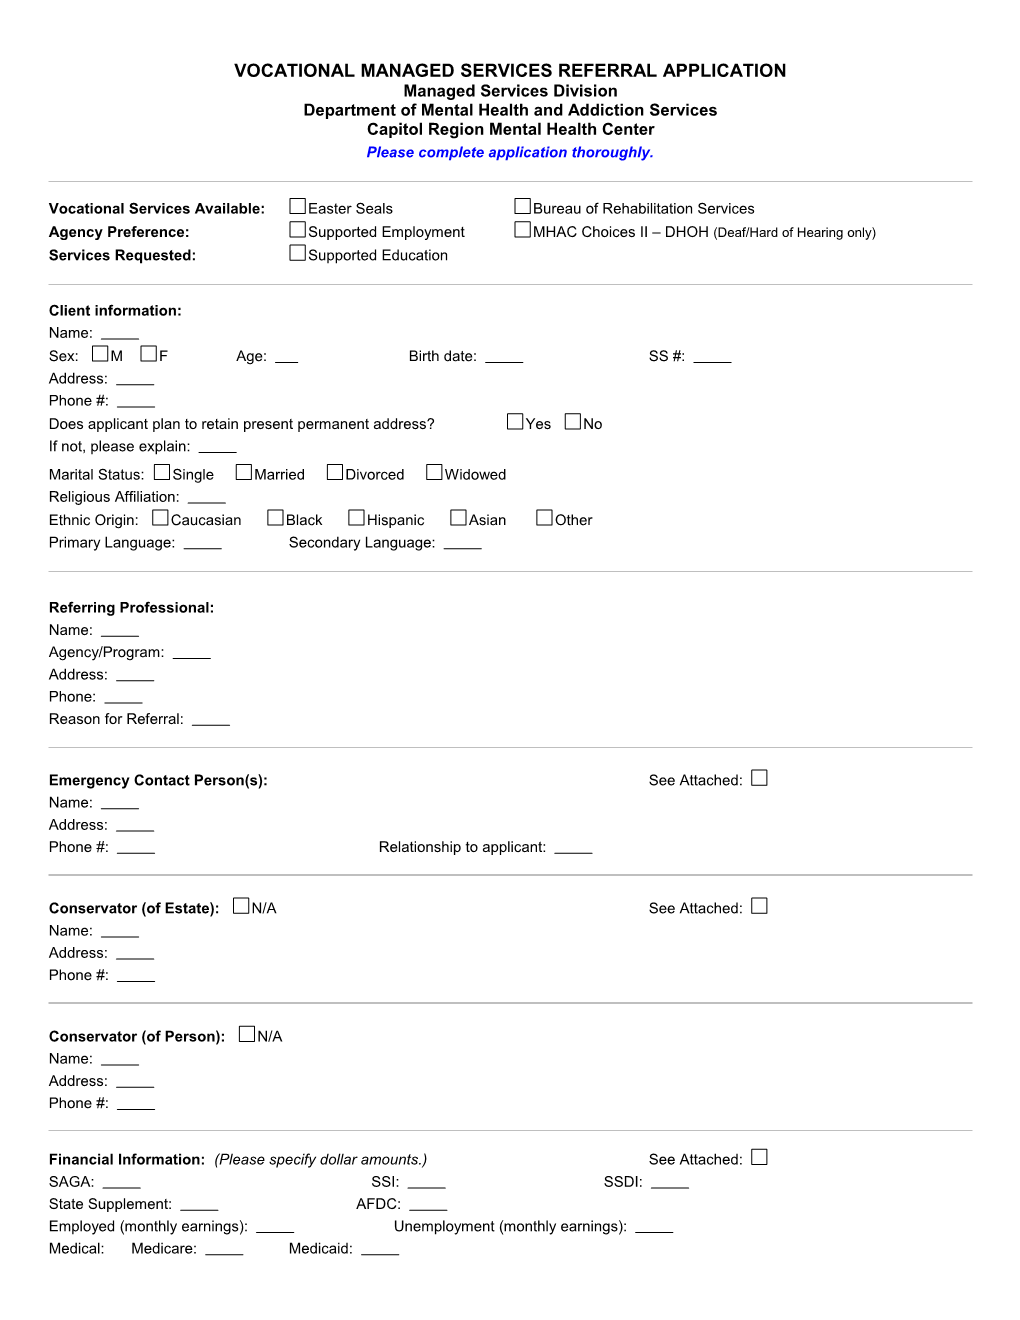 Managed Services Referral Application